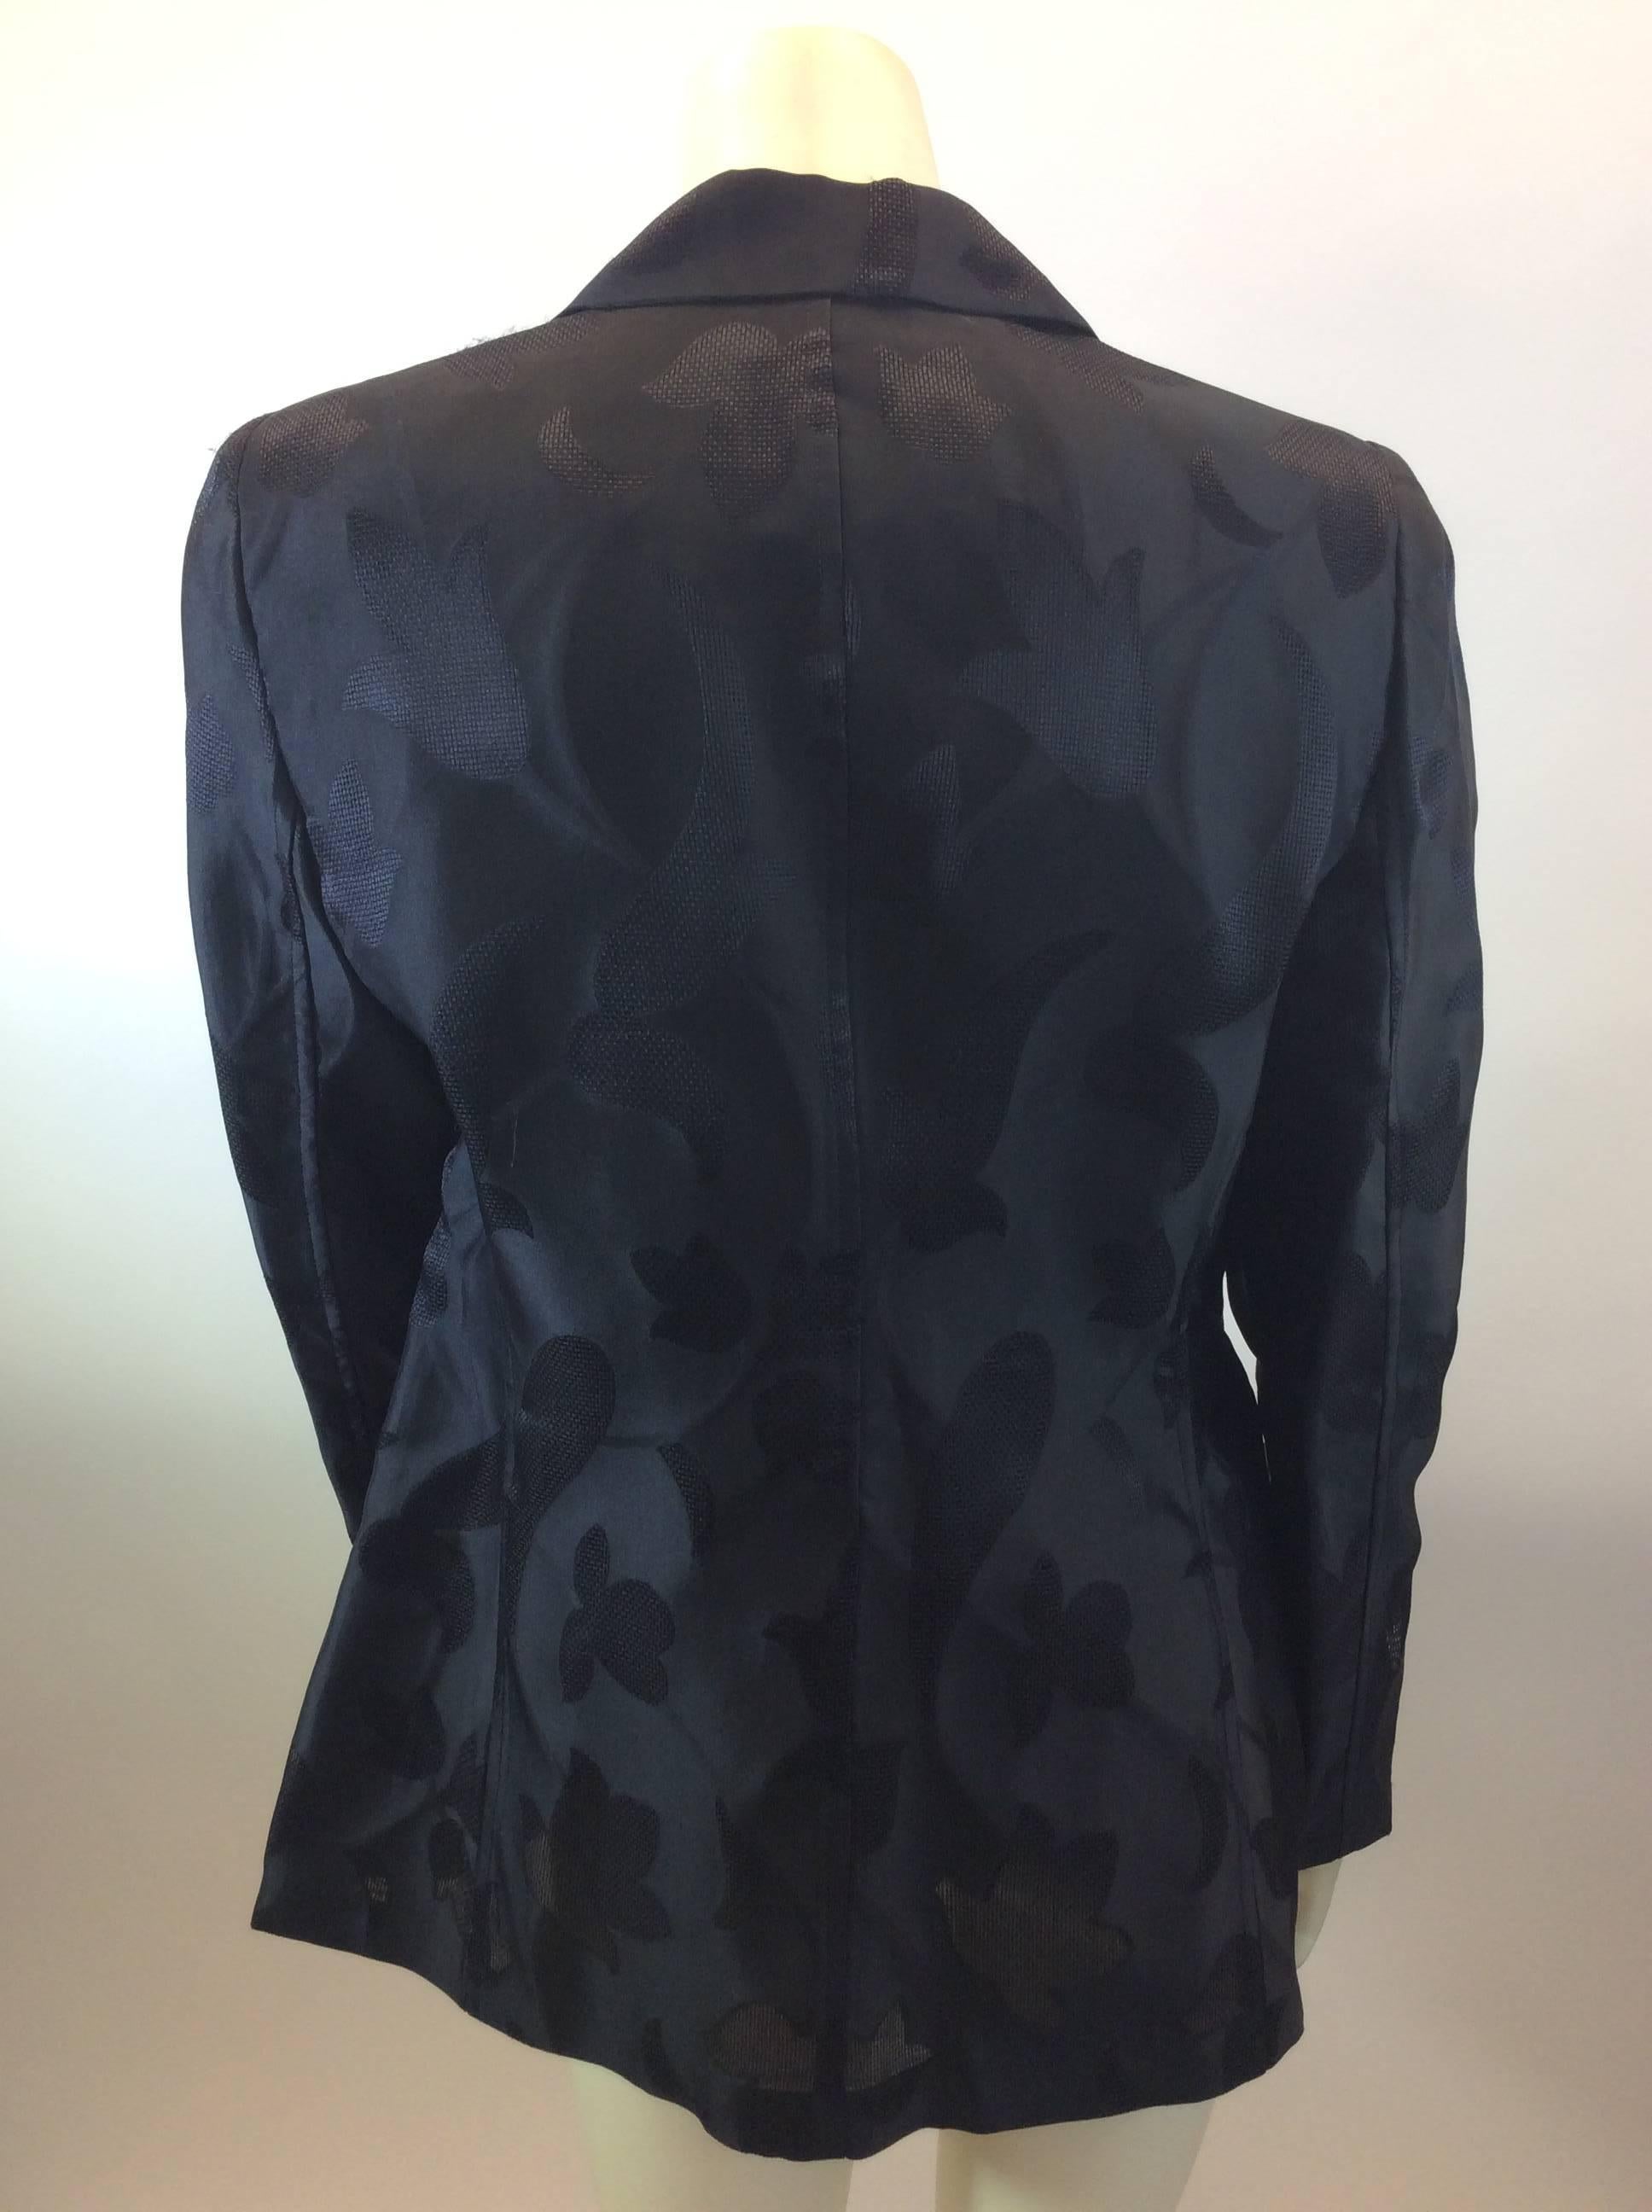 Giorgio Armani Black Detailed Jacket In Excellent Condition For Sale In Narberth, PA